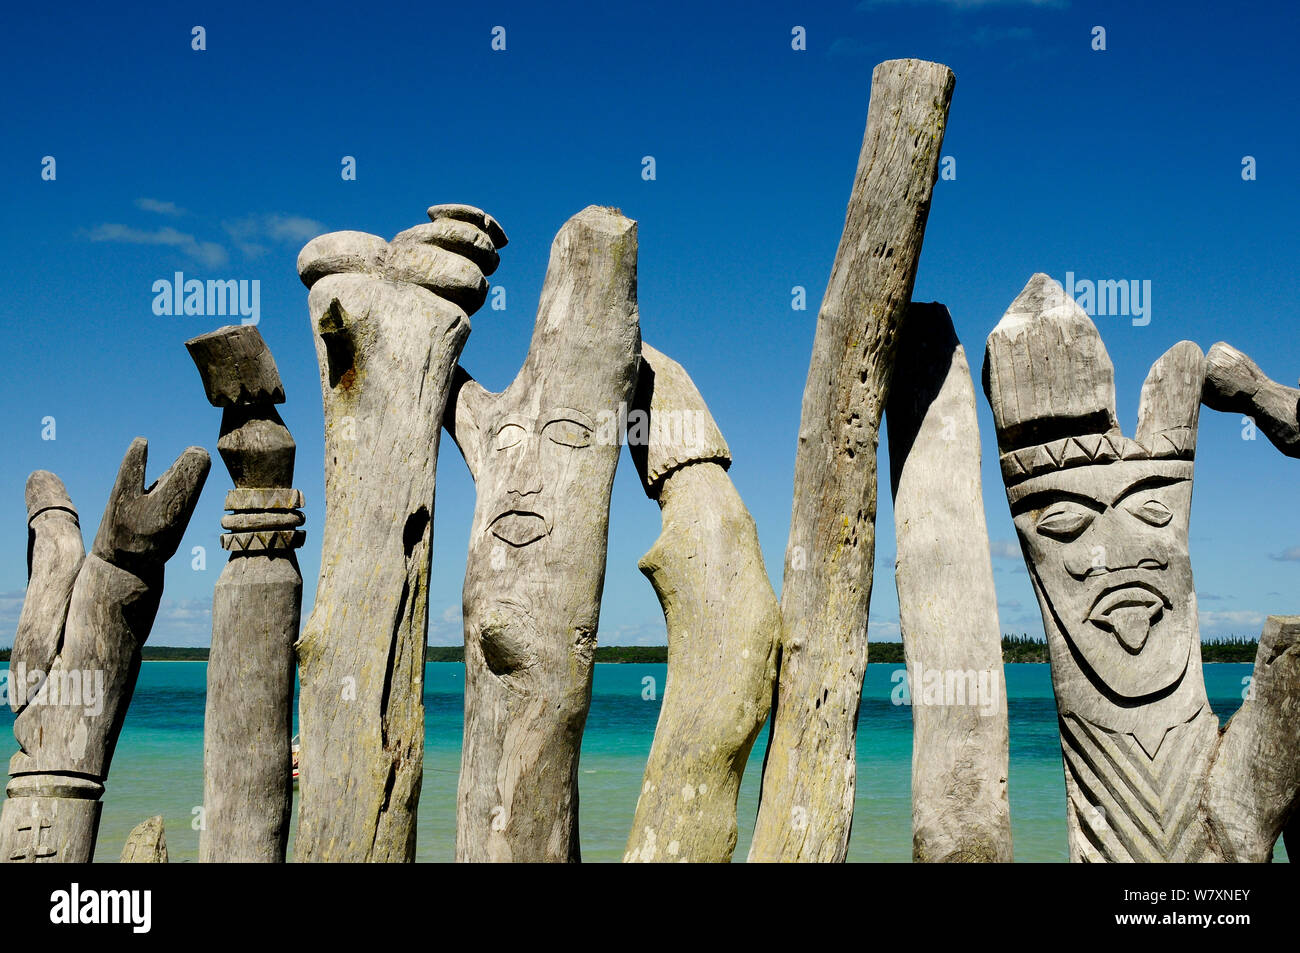 Wooden sculptures of faces, Ile des Pins (Pine Island), New Caledonia, September 2008. Stock Photo